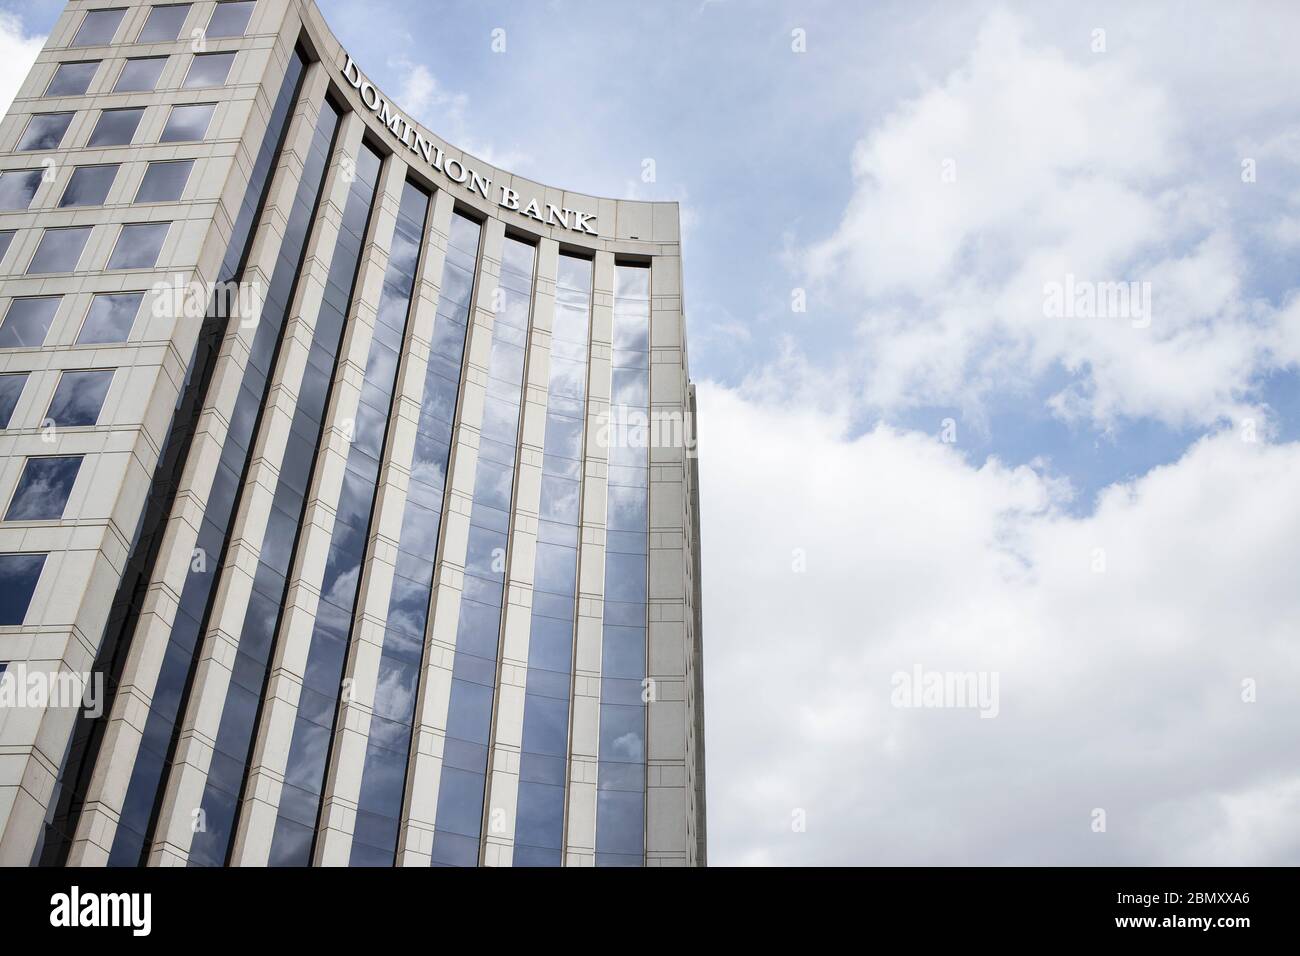 Dallas, Texas bank tower standing against the sky reflecting clouds for an imposing view of business and finance Stock Photo